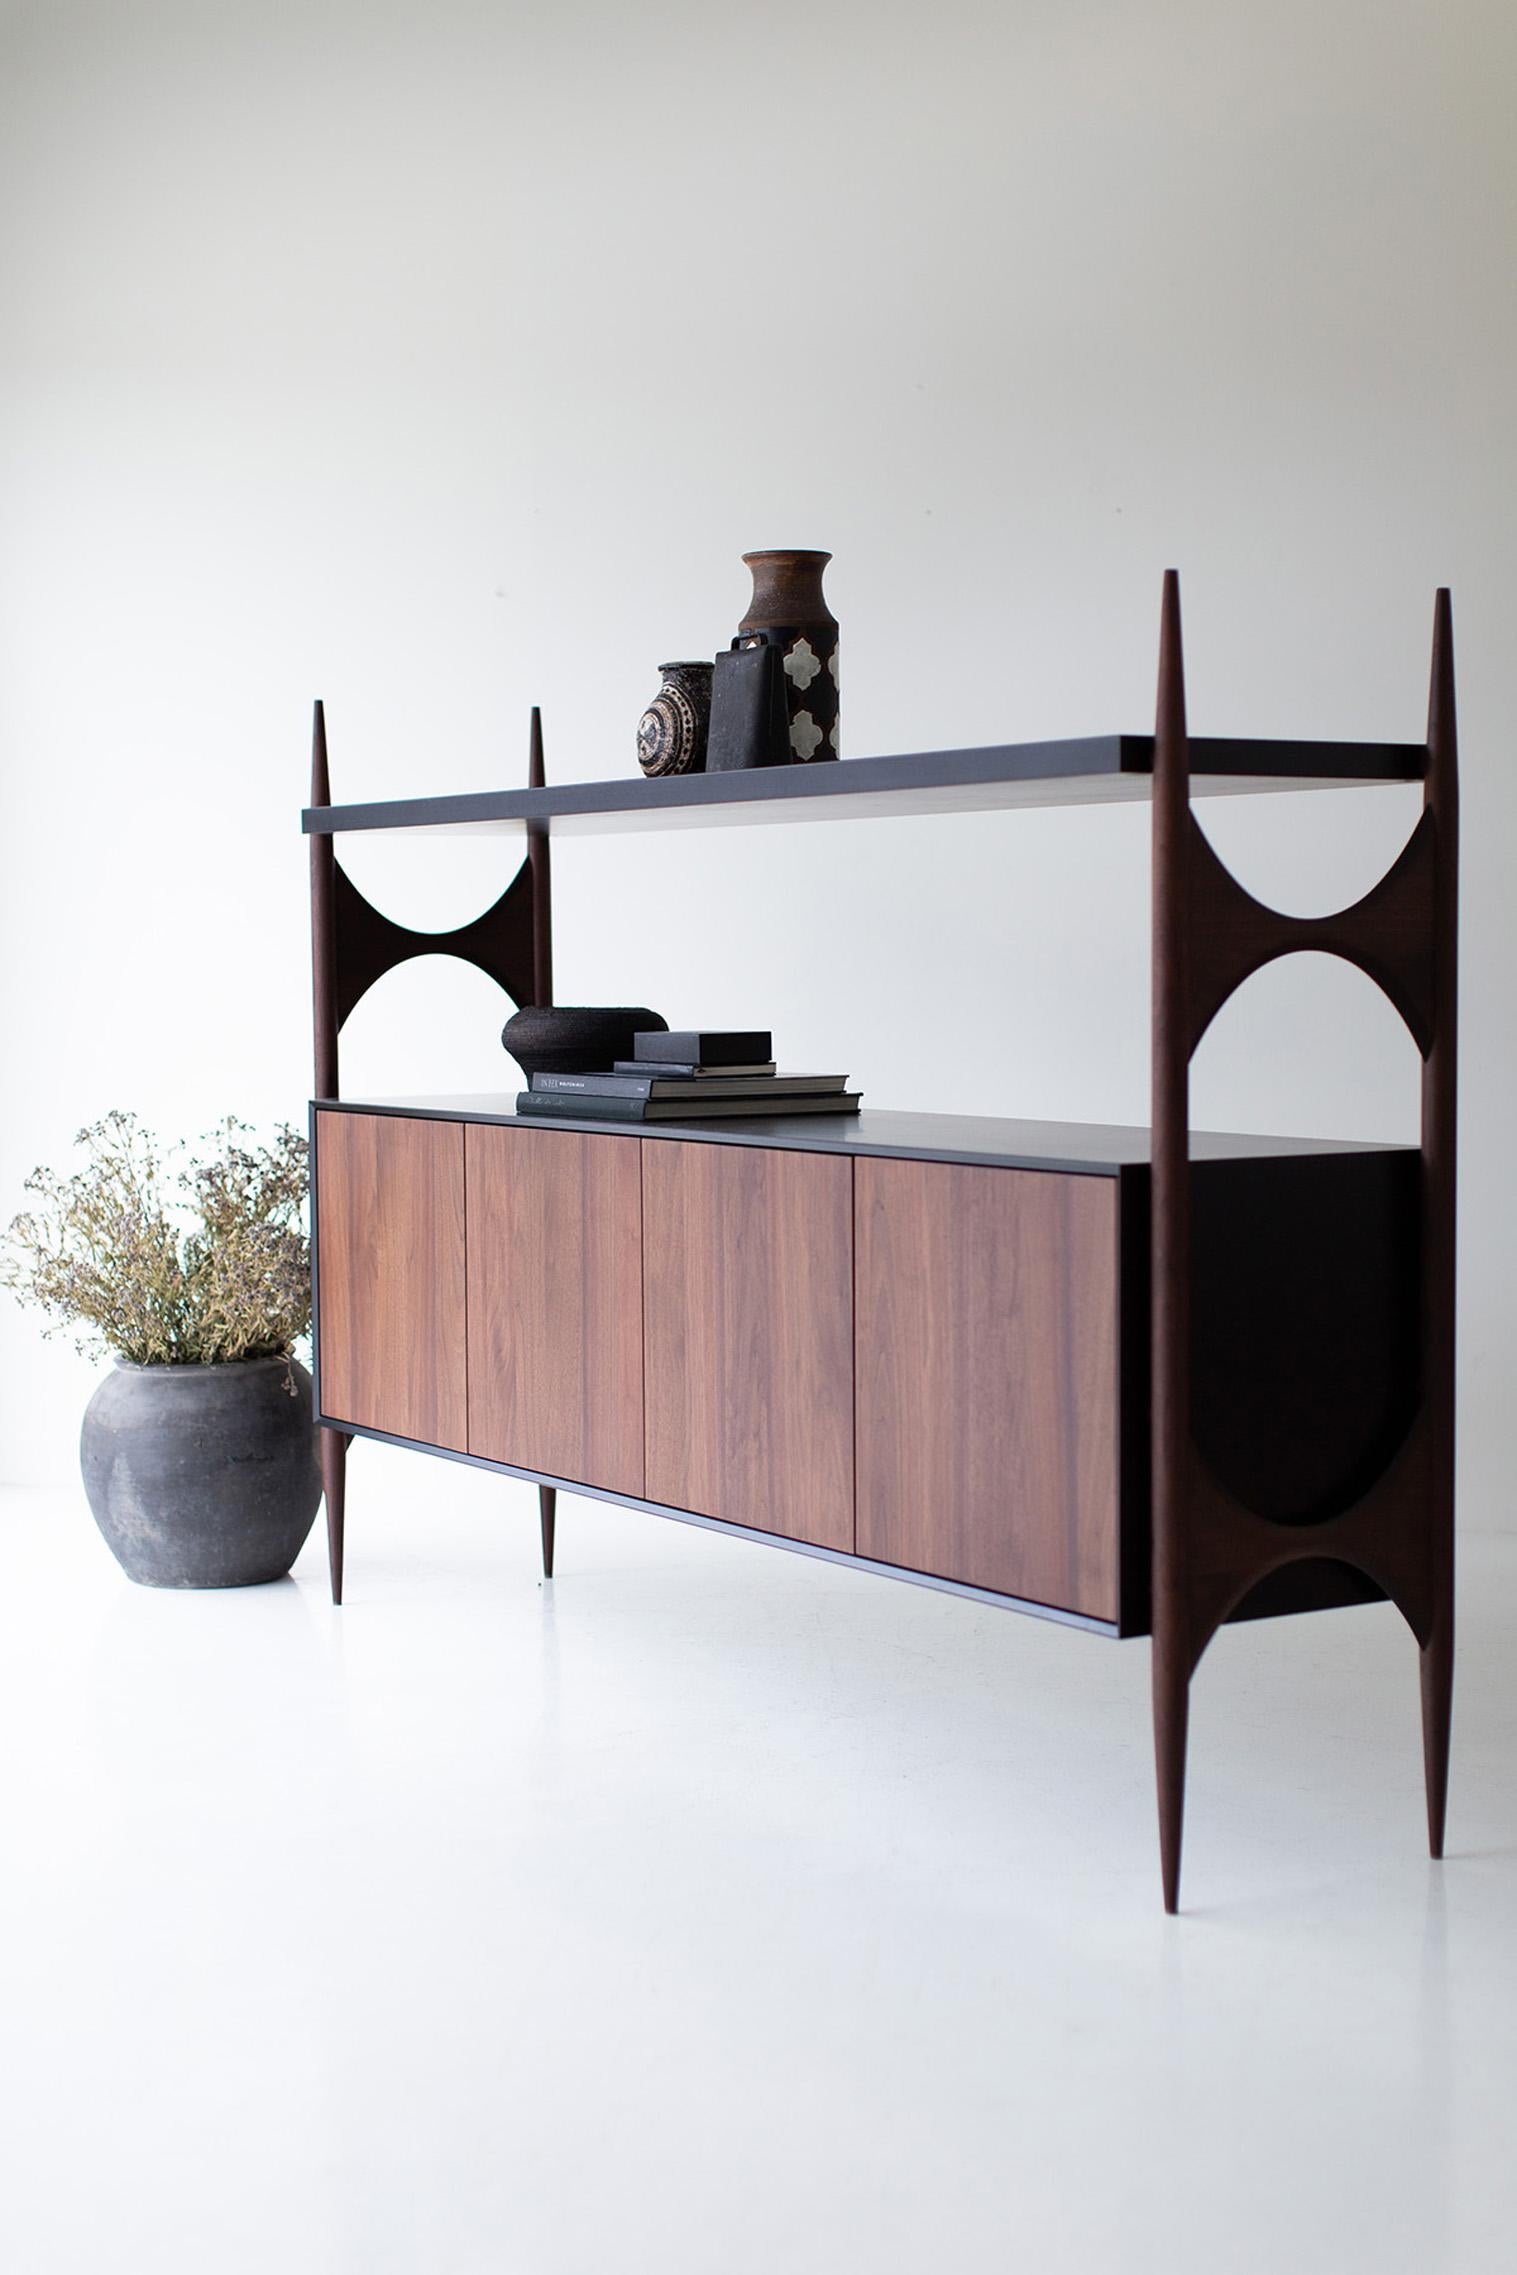 CraftAssociates Hutch, Modern Walnut Hutch, Black and Walnut, Cambre Collection

This modern walnut credenza from the Cambre Collection for Craft Associates Furniture is expertly crafted. The legs and door fronts are constructed by artisans from